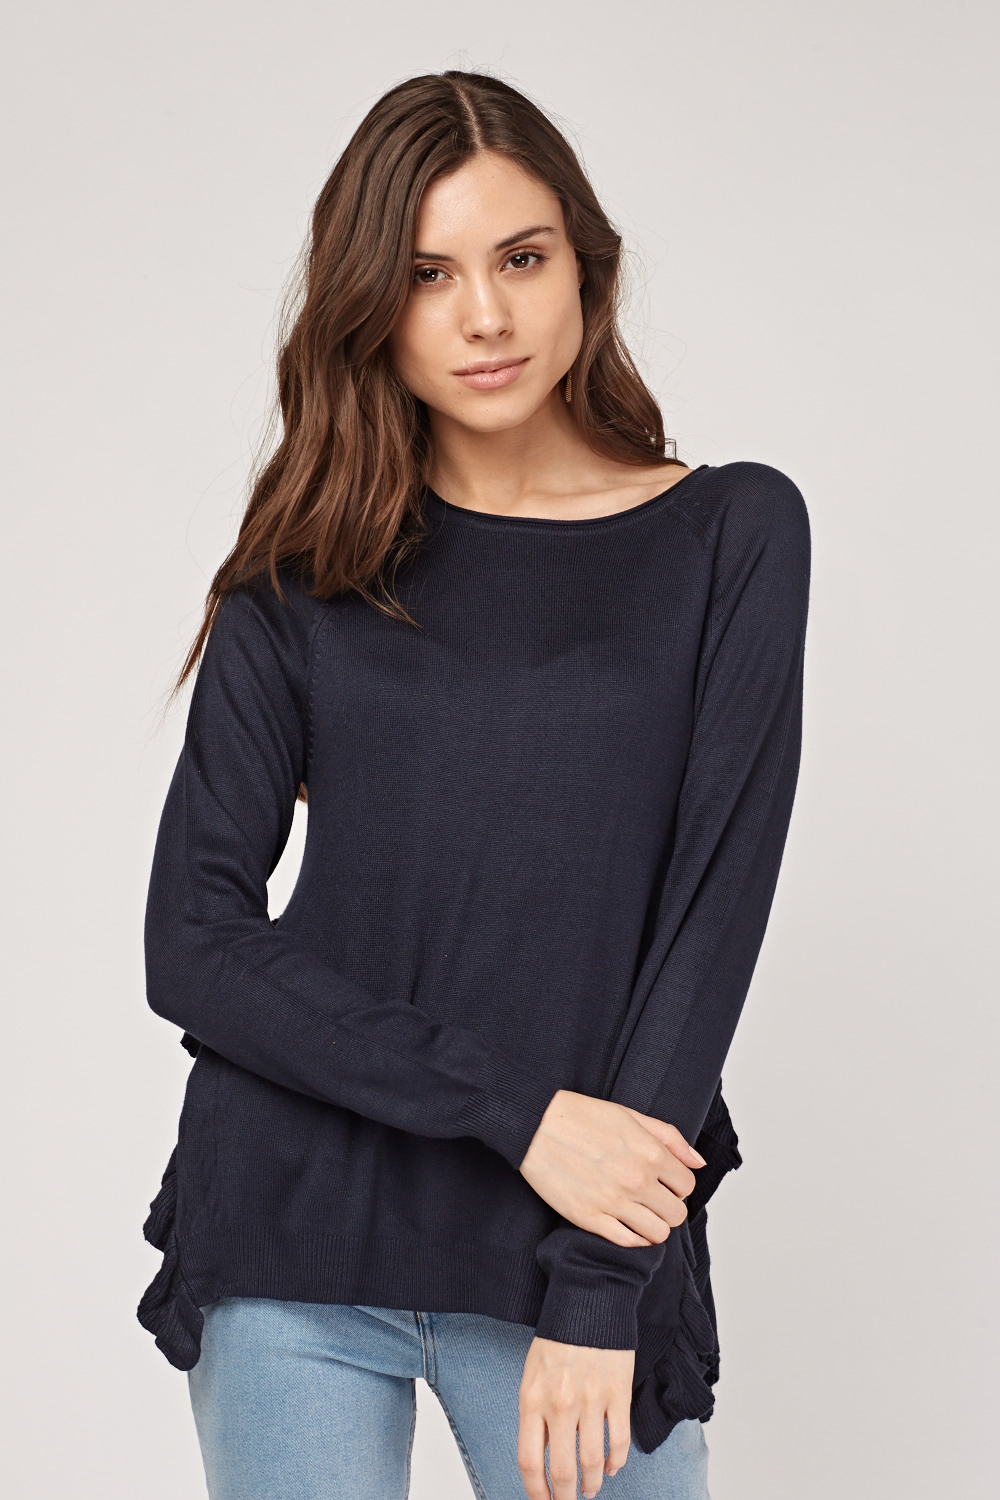 Ruffle Side Slit Knitted Jumper - Just $6